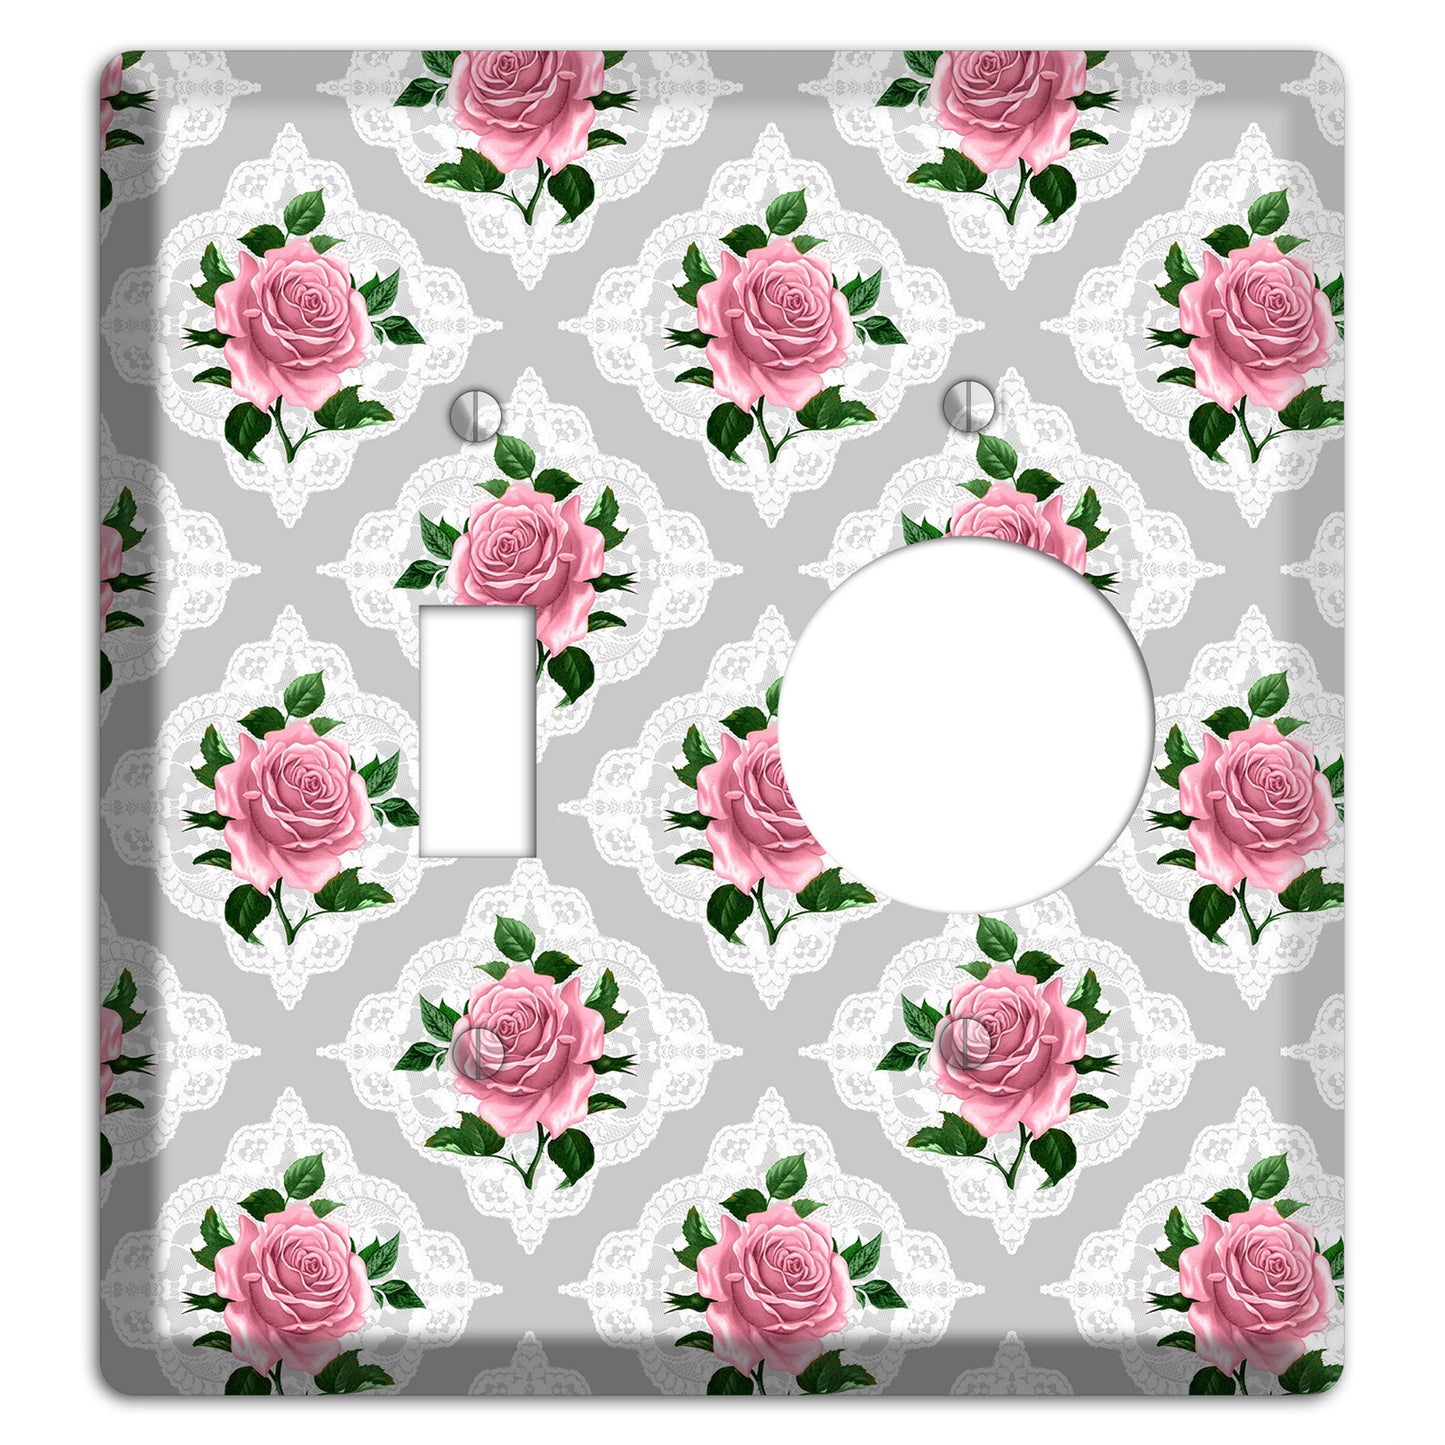 Gray Rose Doily Toggle / Receptacle Wallplate